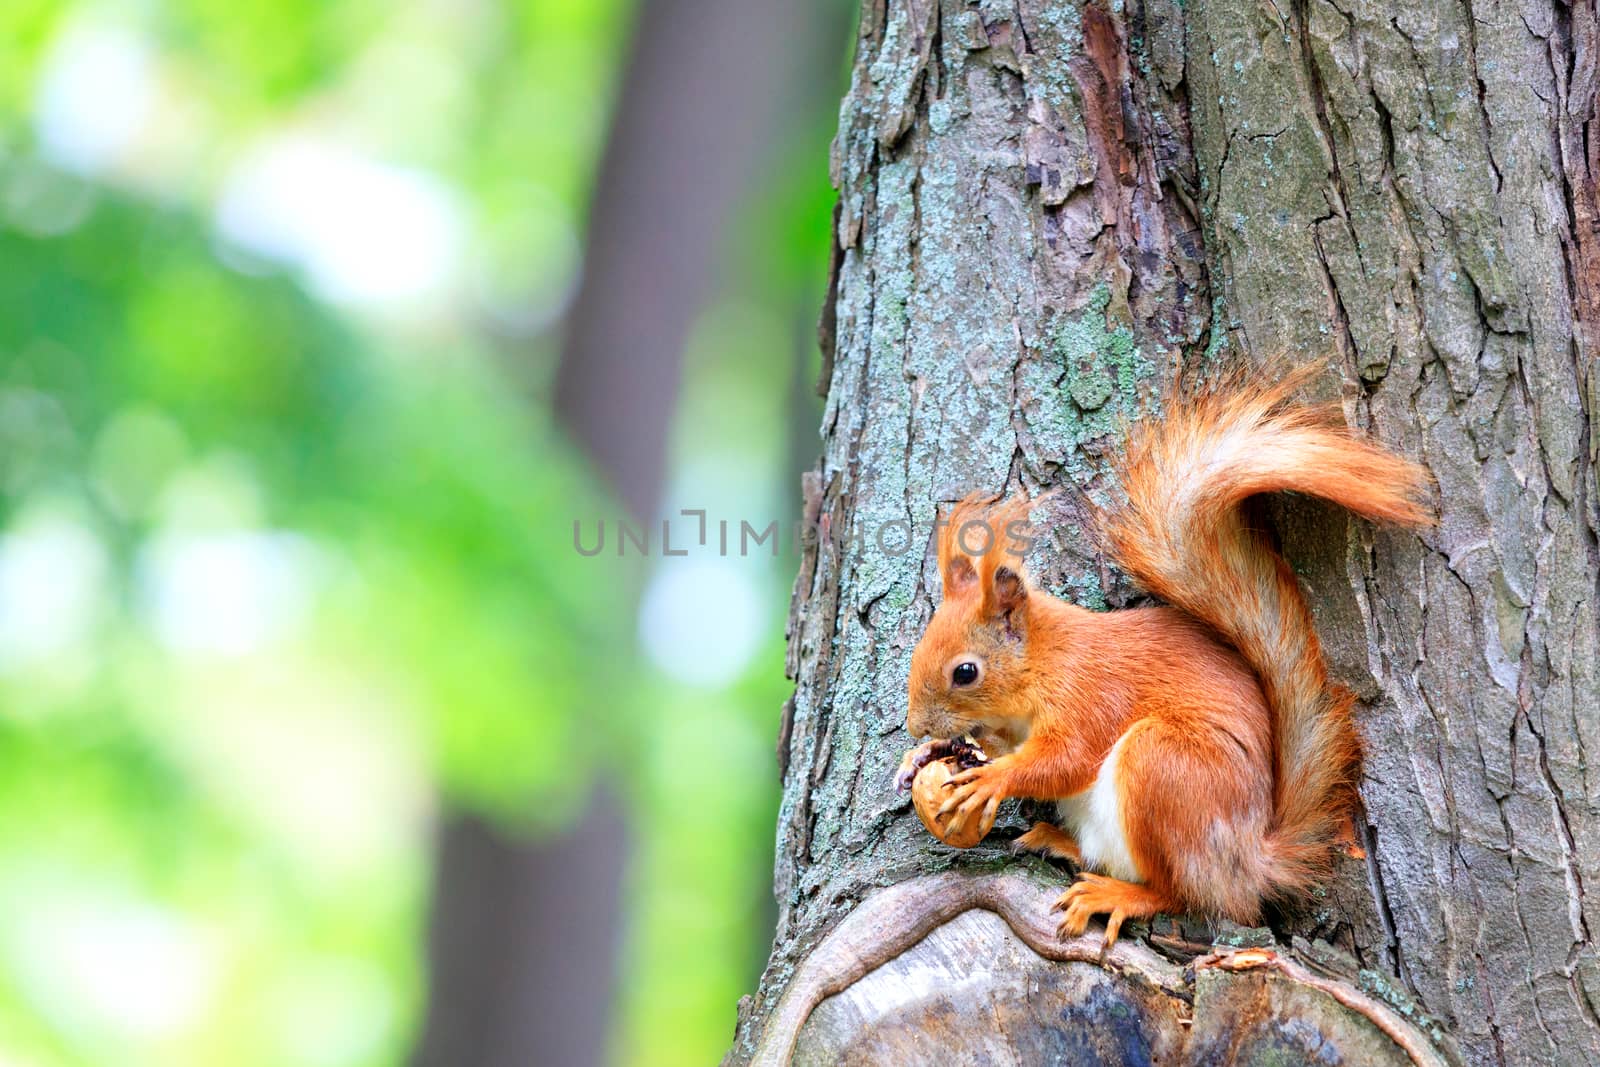 An orange fluffy squirrel sits on a tree and gnaws a nut found, copy space, close-up.